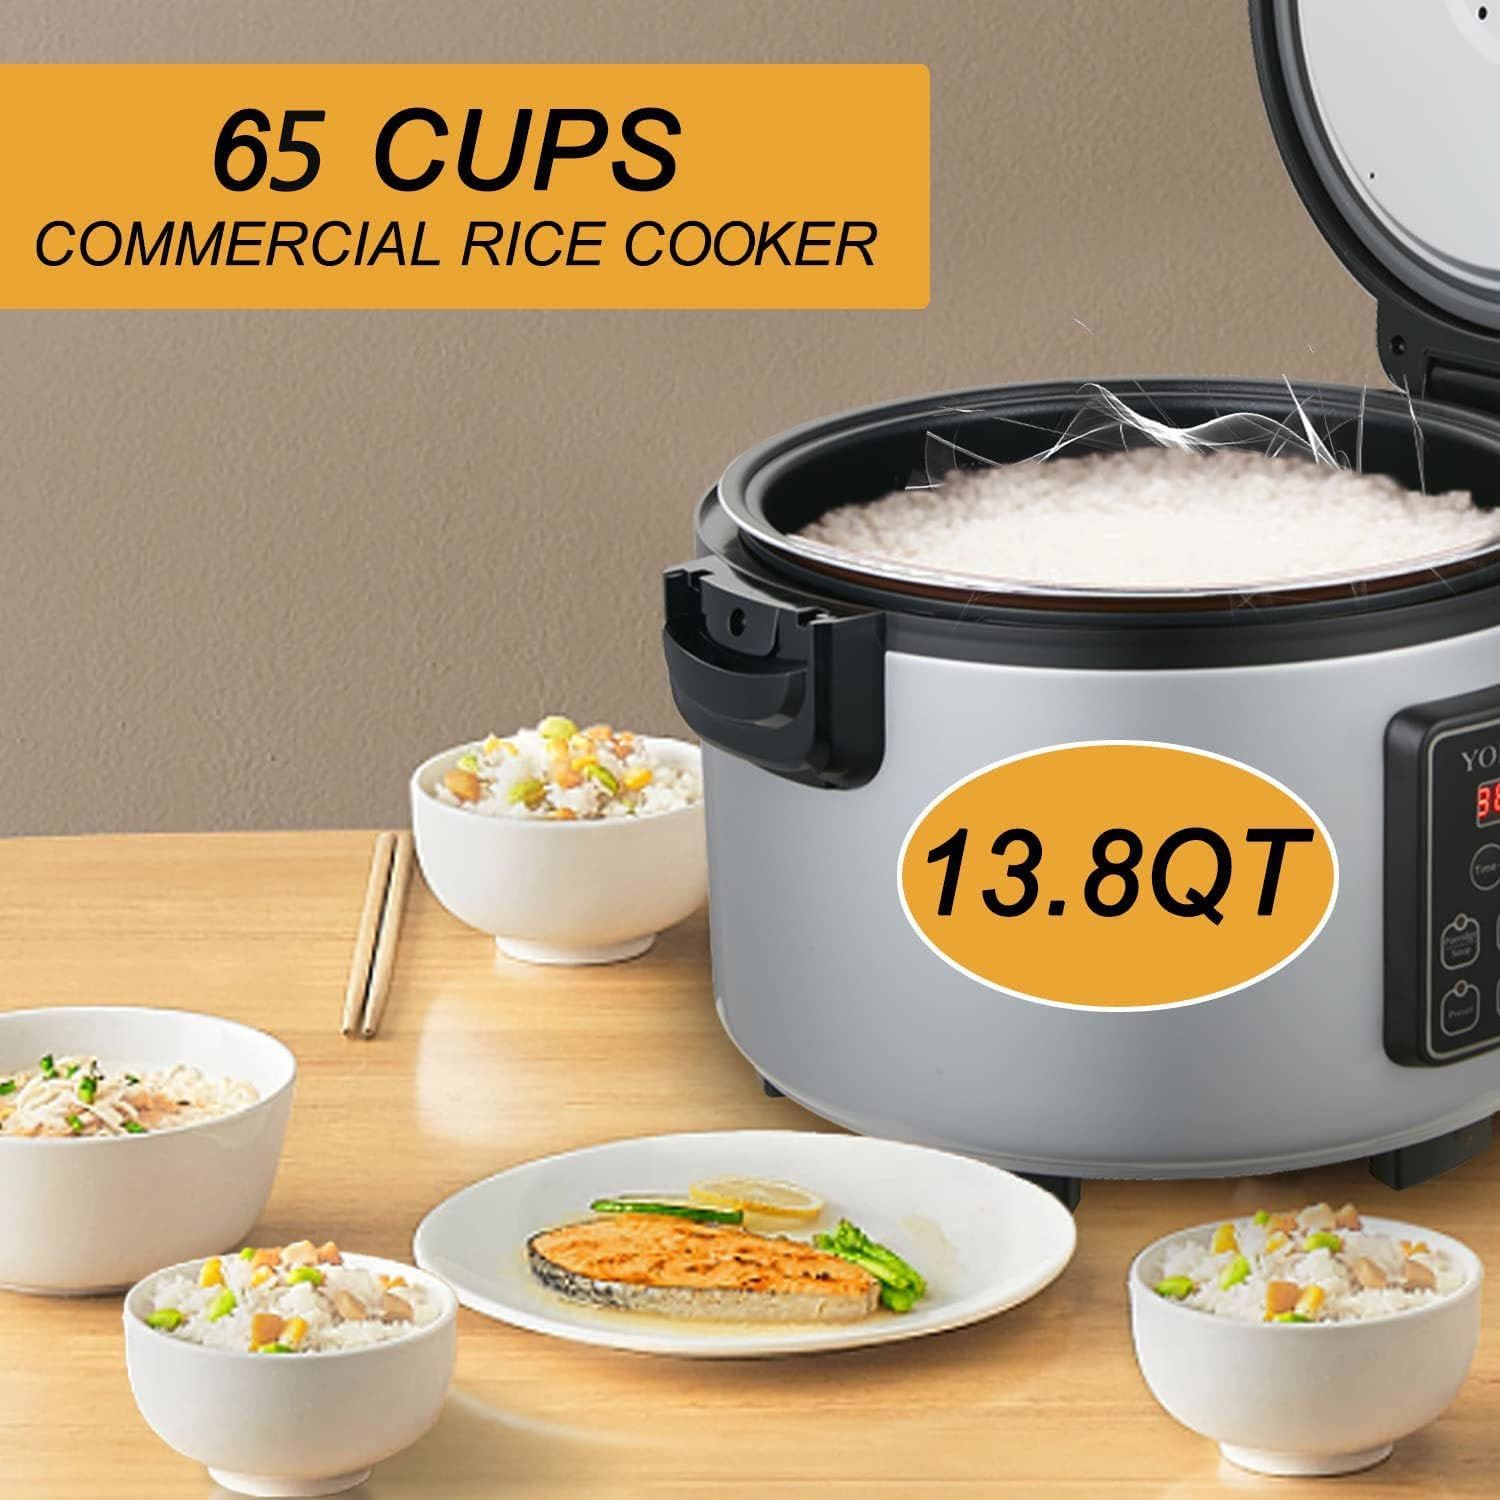 13.8QT/65 Cups Commercial Large Rice Cooker